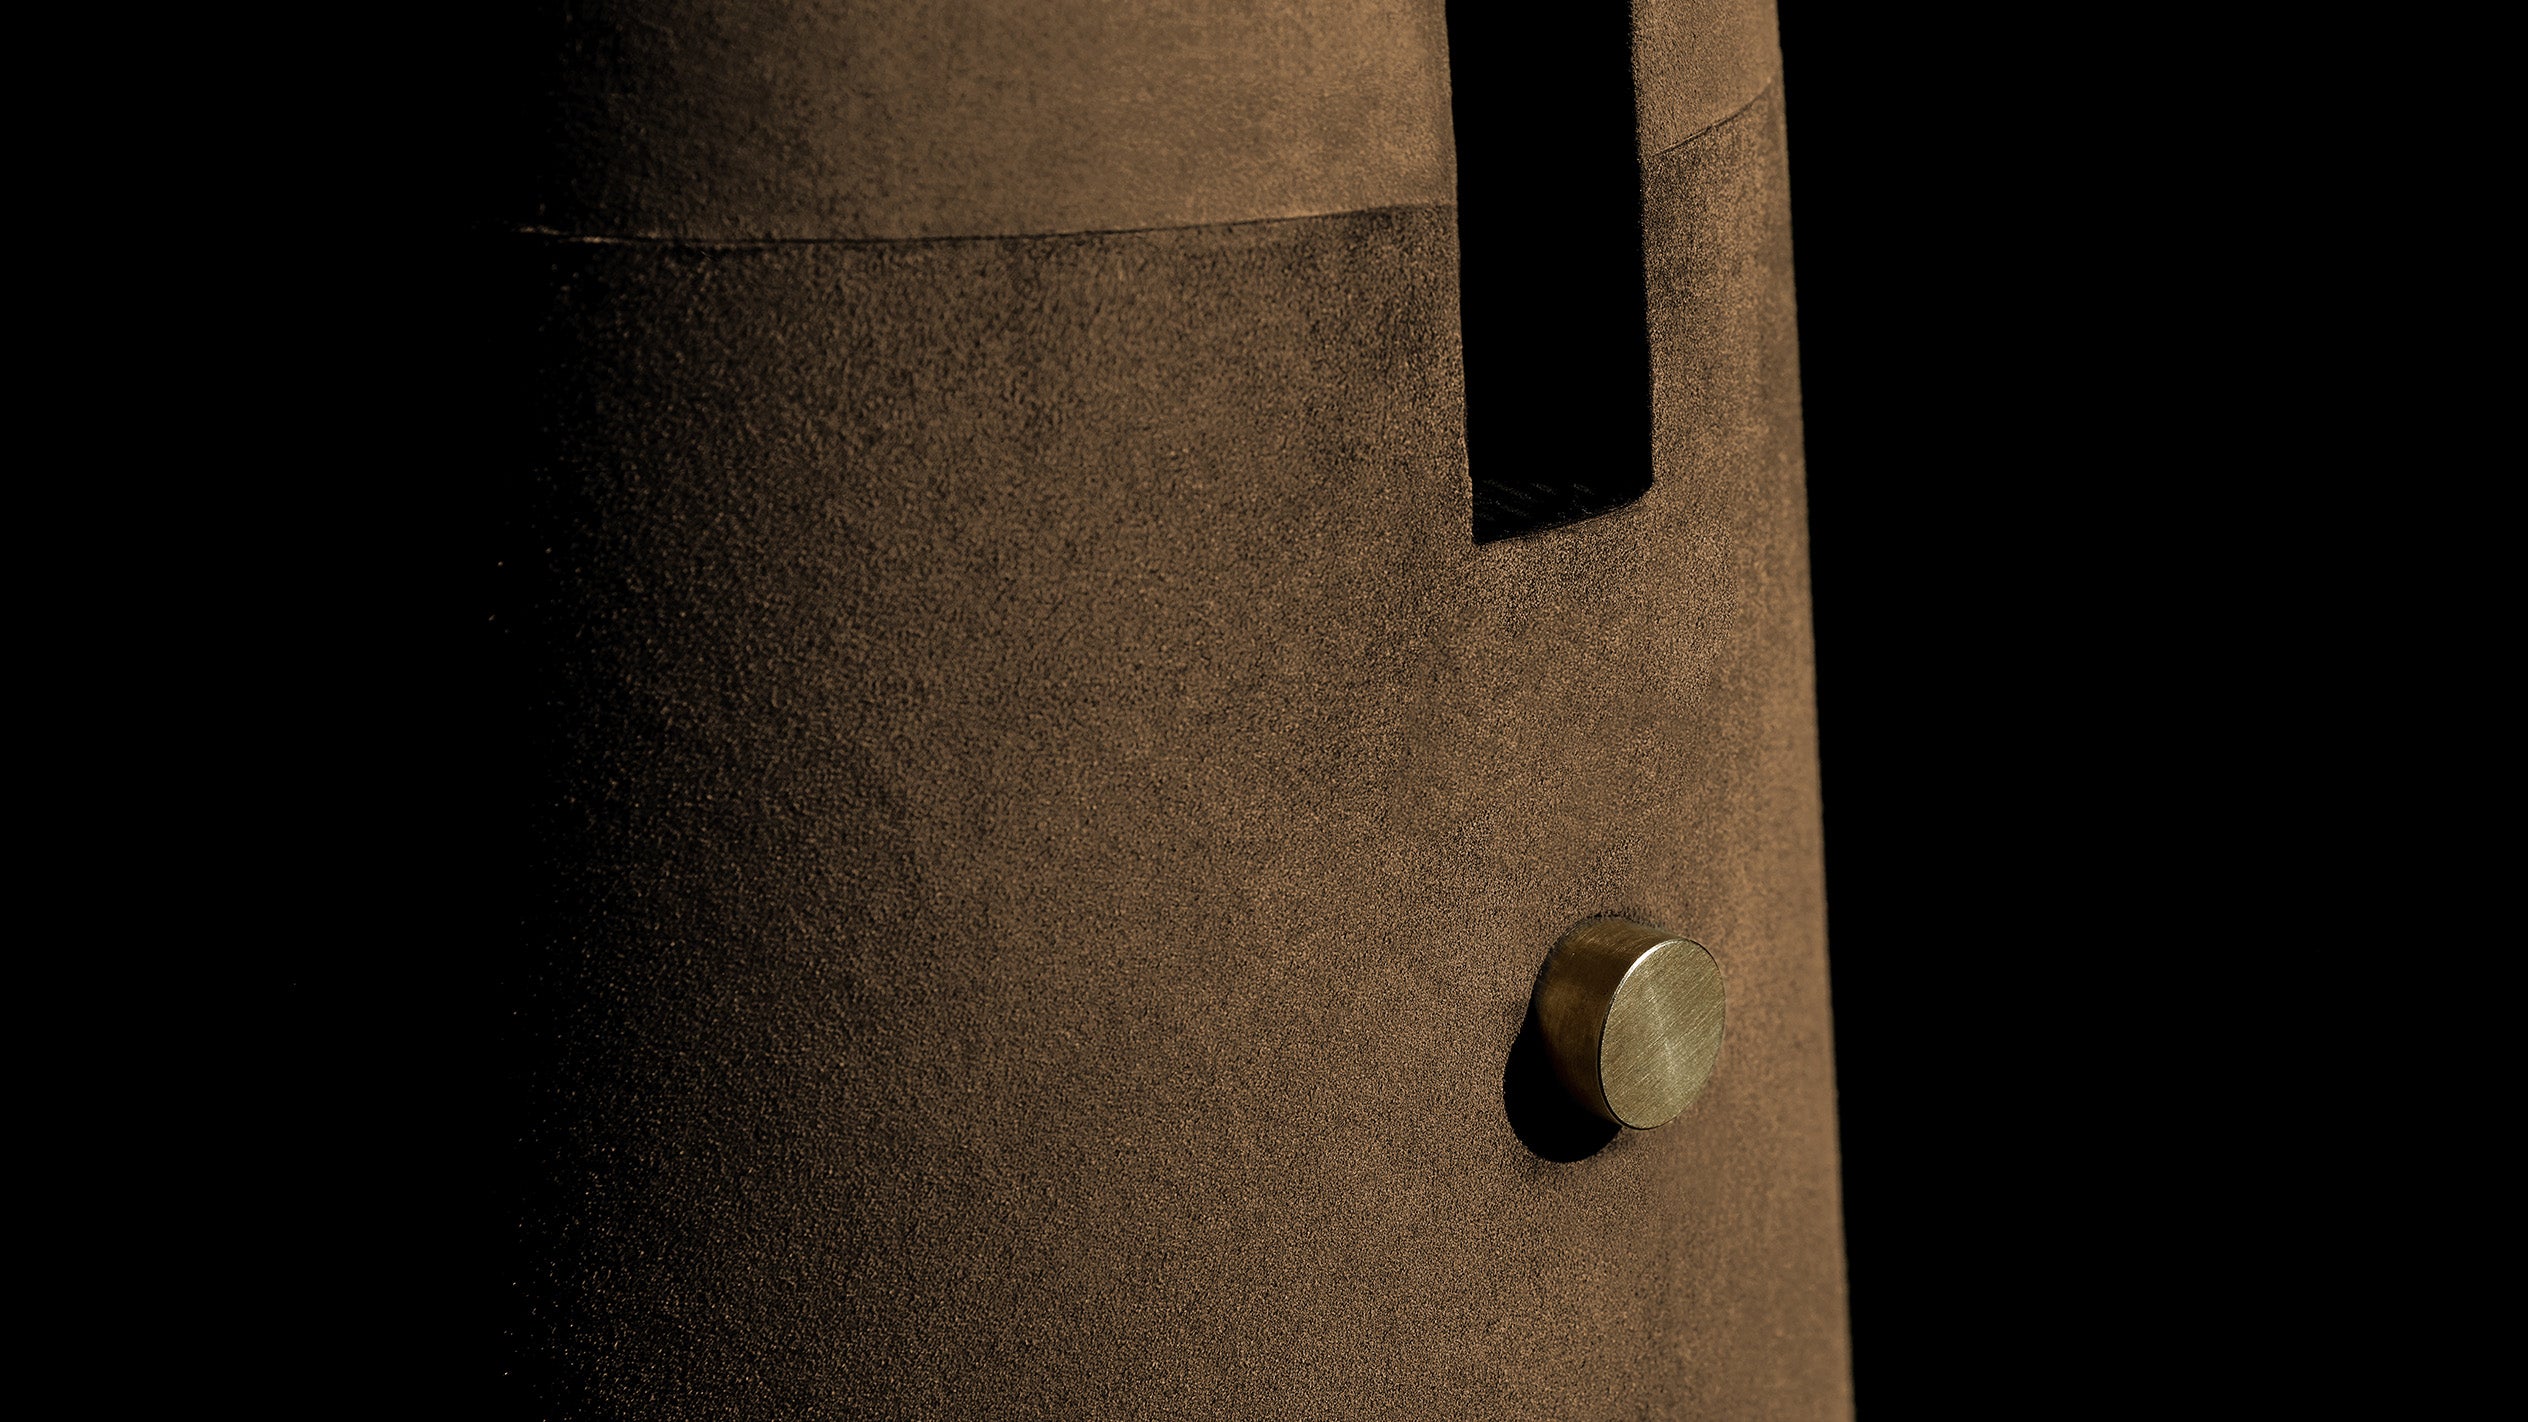 Close ups of the METRONOME table lamp showing details of the Aged Brass and Bronze Suede.